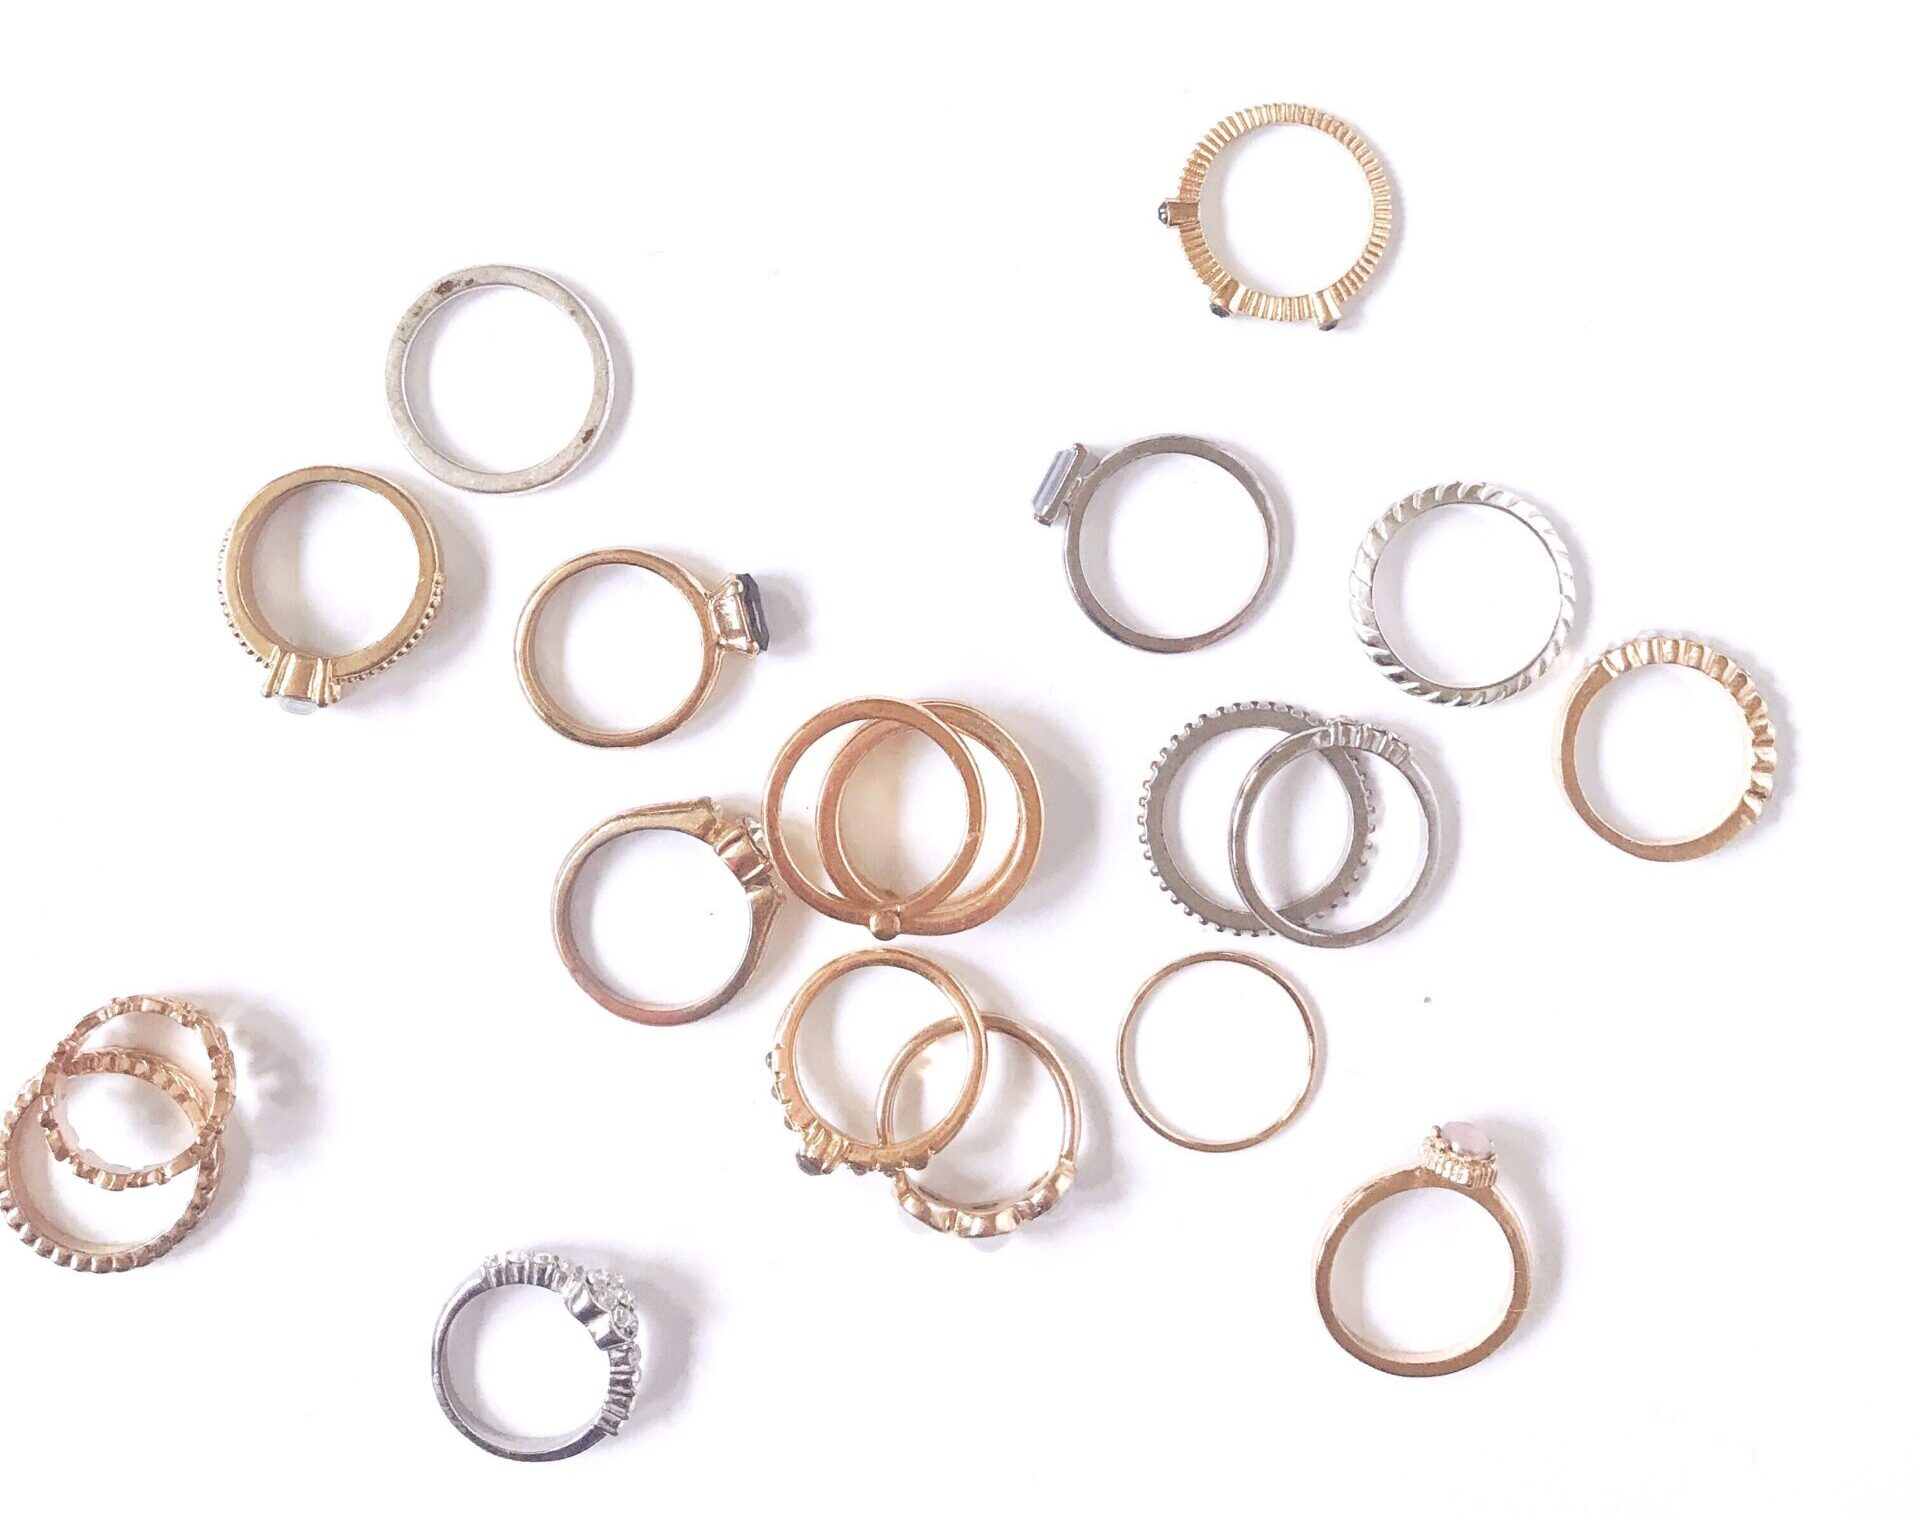 The Definitive Guide to Cleaning & Storing Rhodium-Plated Silver Jewelry